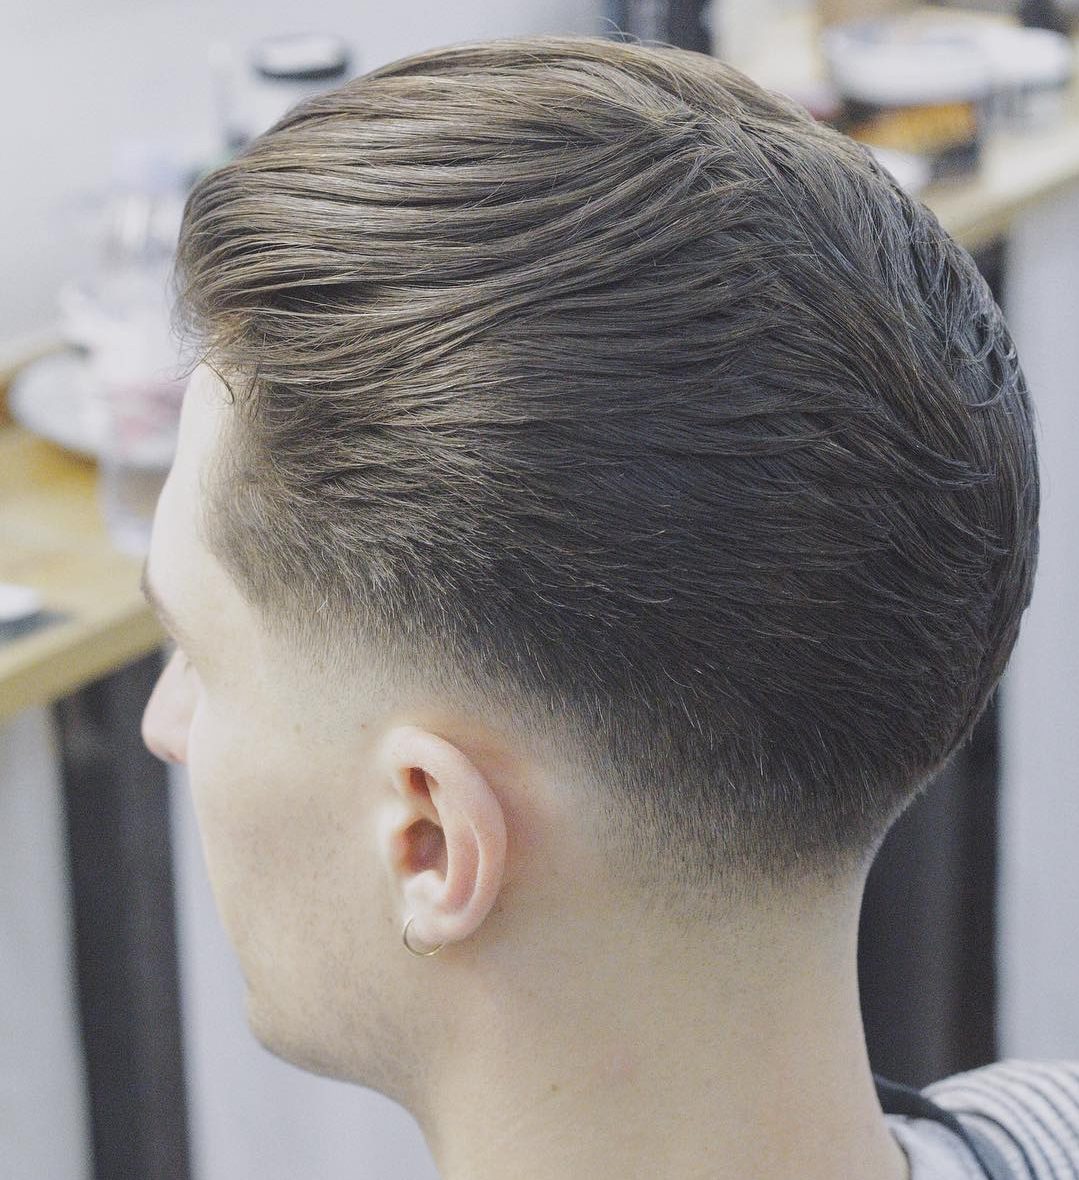 Tapered haircut with low fade